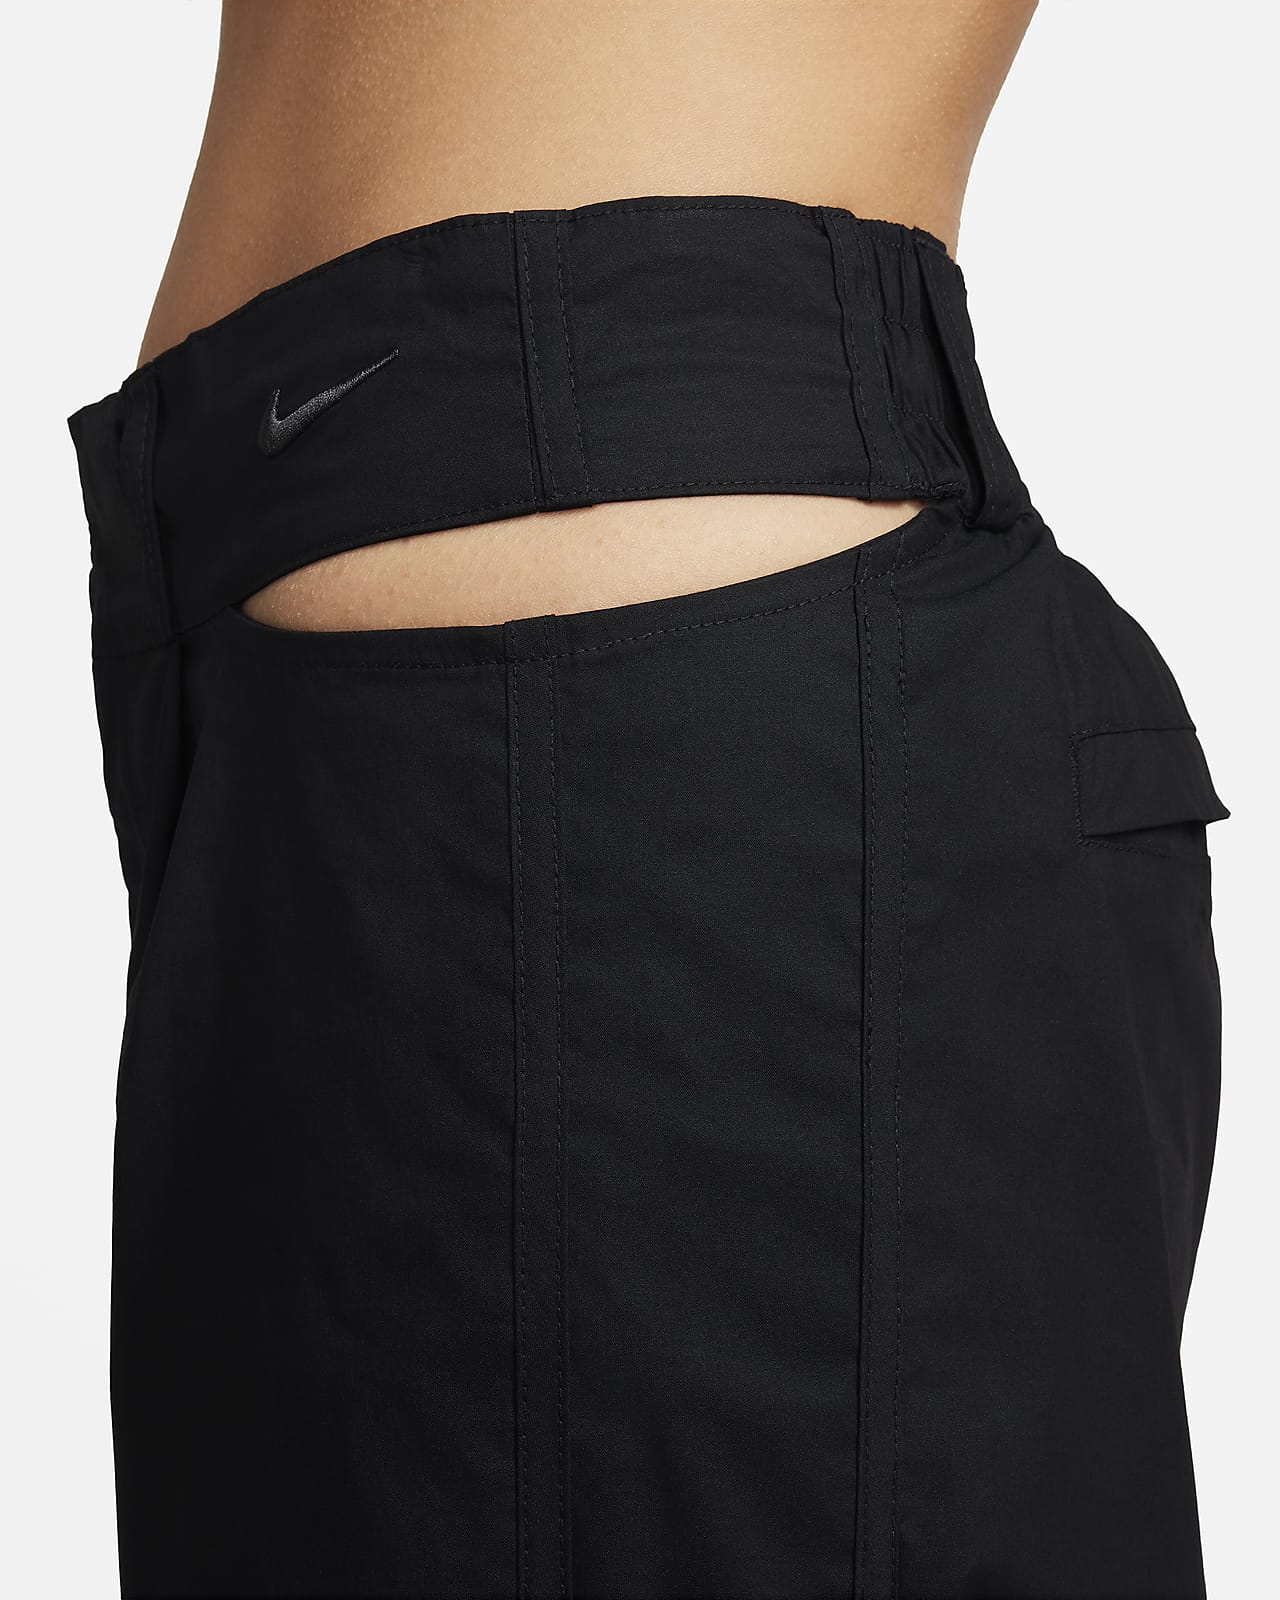 Nike Womens NSW AIR TRK Pant Satin Womens BV4781-010 Size L Black :  : Clothing & Accessories